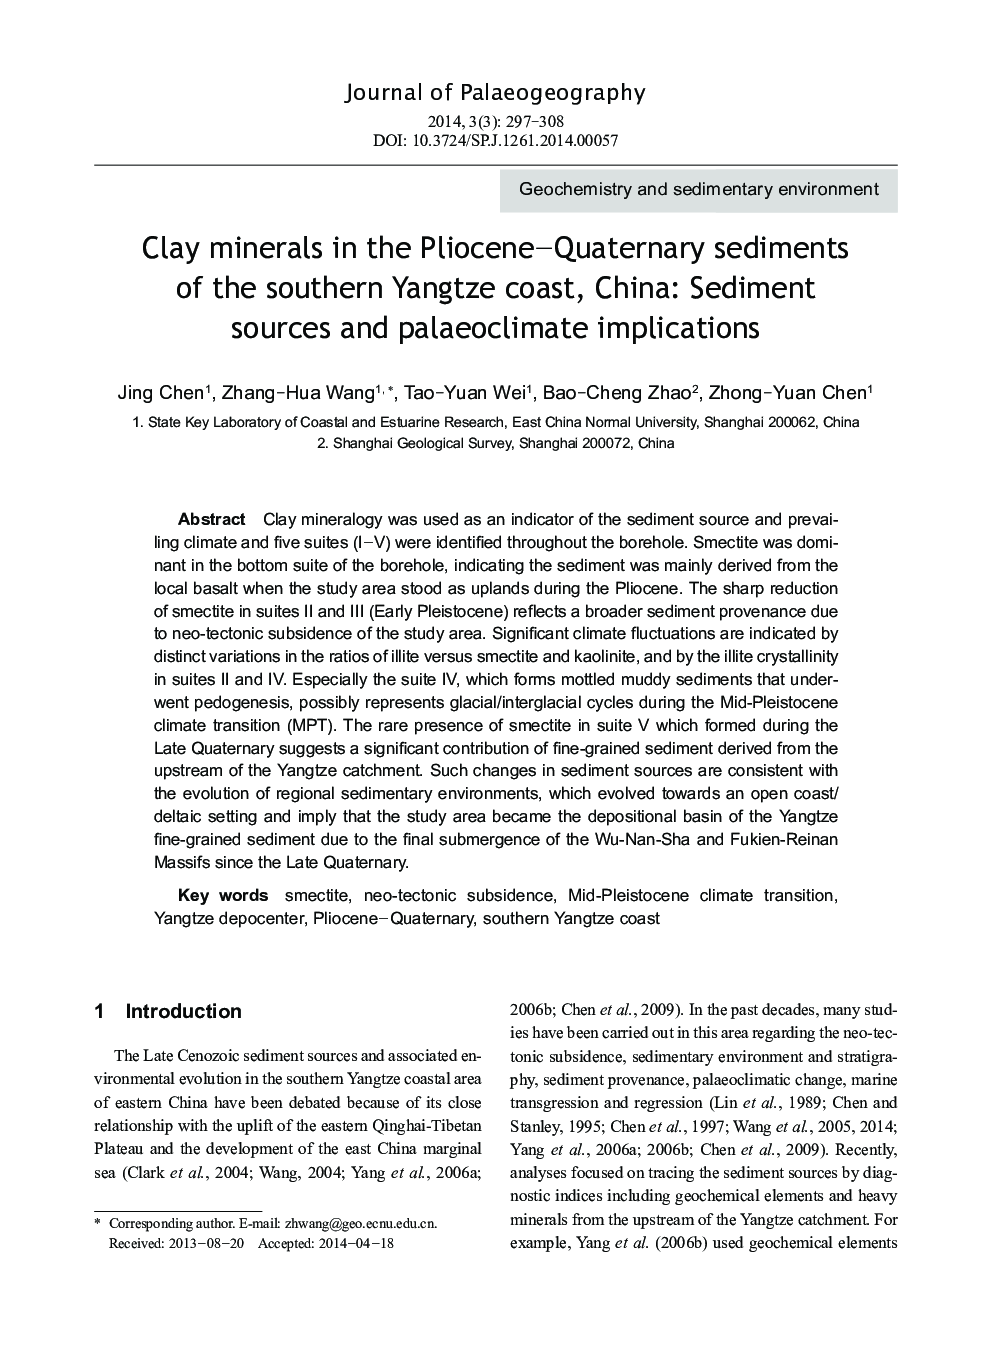 Clay minerals in the Pliocene–Quaternary sediments of the southern Yangtze coast, China: Sediment sources and palaeoclimate implications